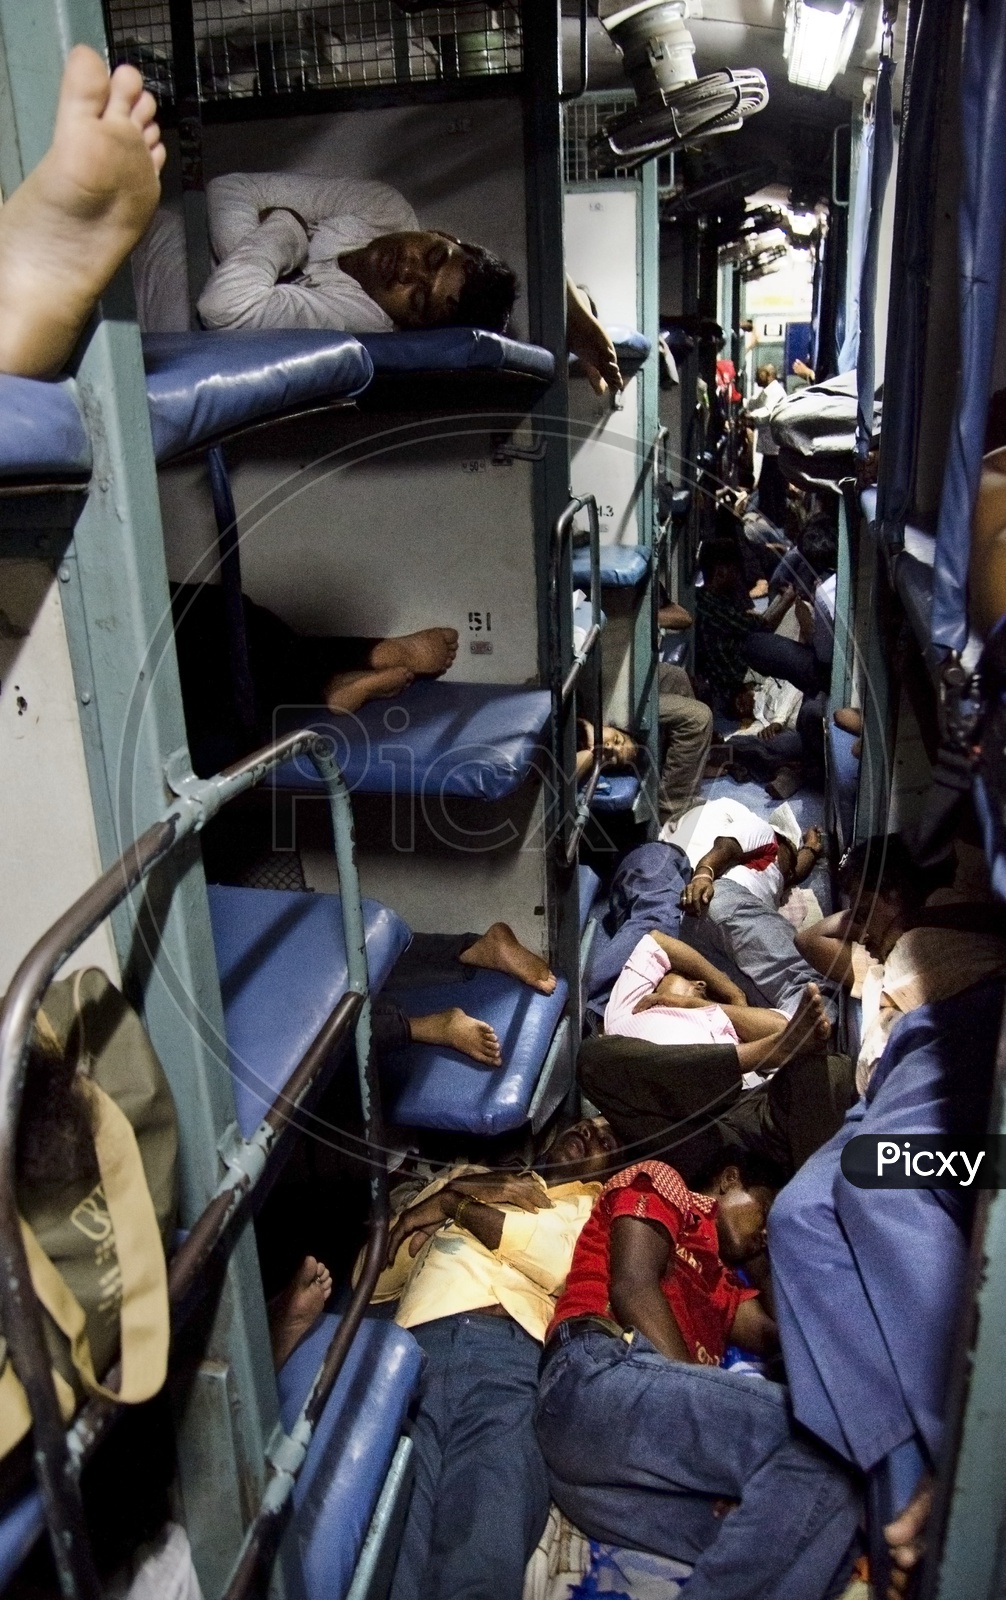 Passengers sleeping congested in a Train